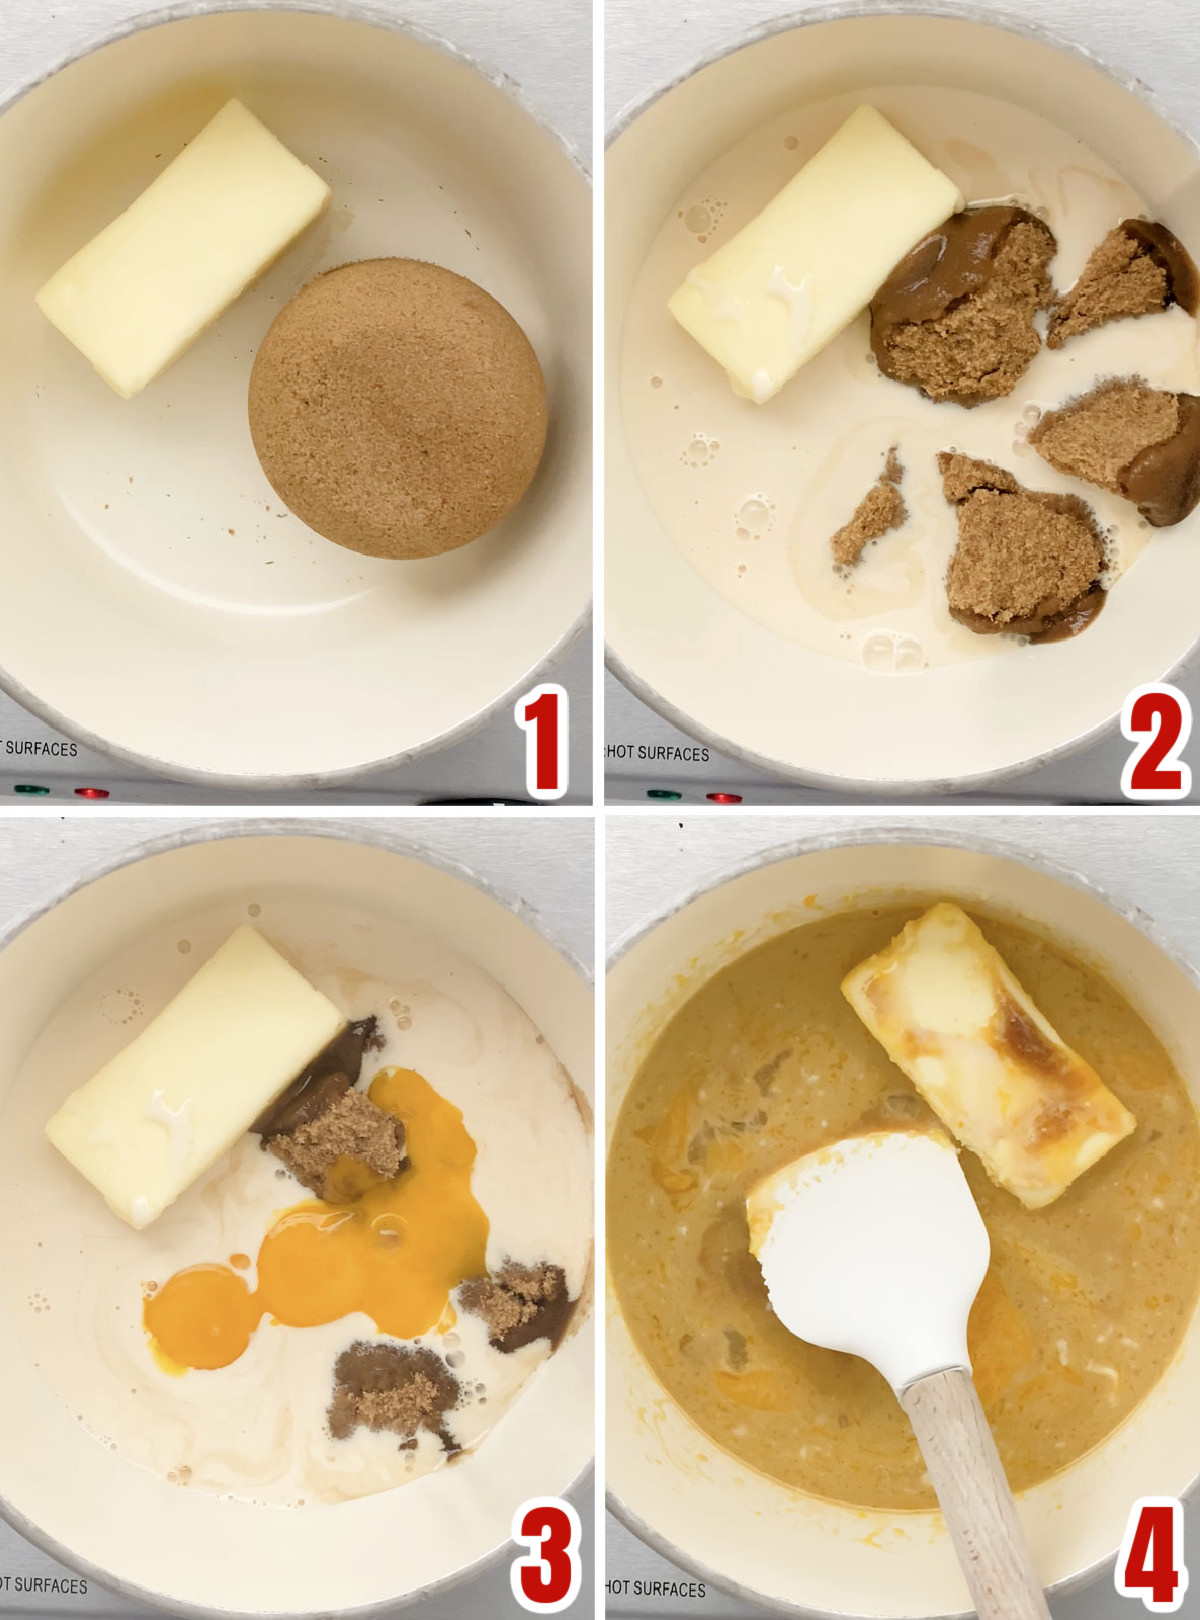 Collage image showing the steps for making the caramel sauce for the German Chocolate Frosting.